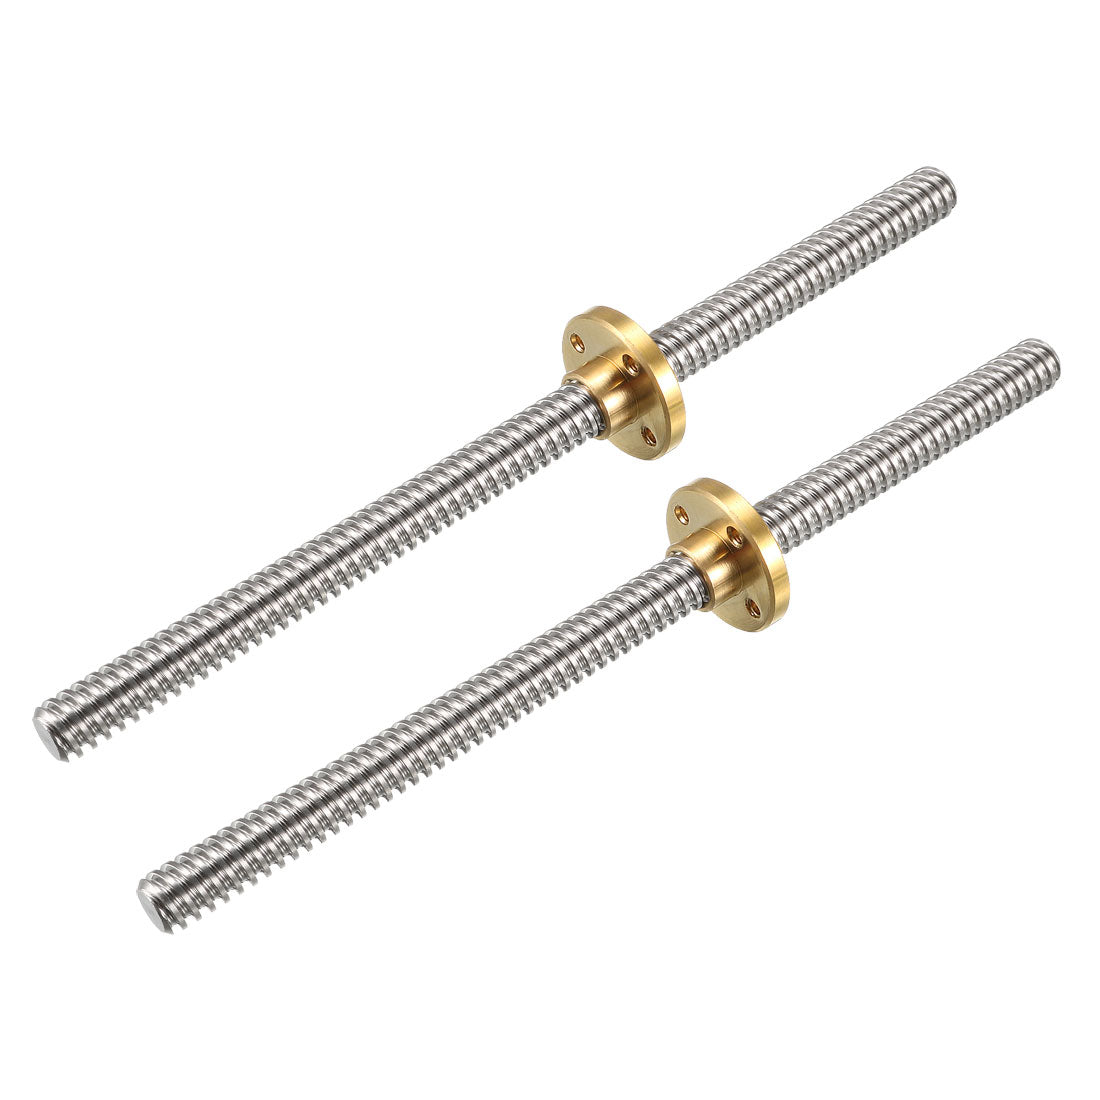 uxcell Uxcell 2PCS 150mm T8 Pitch 2mm Lead 4mm Lead Screw Rod with Copper Nut for 3D Printer